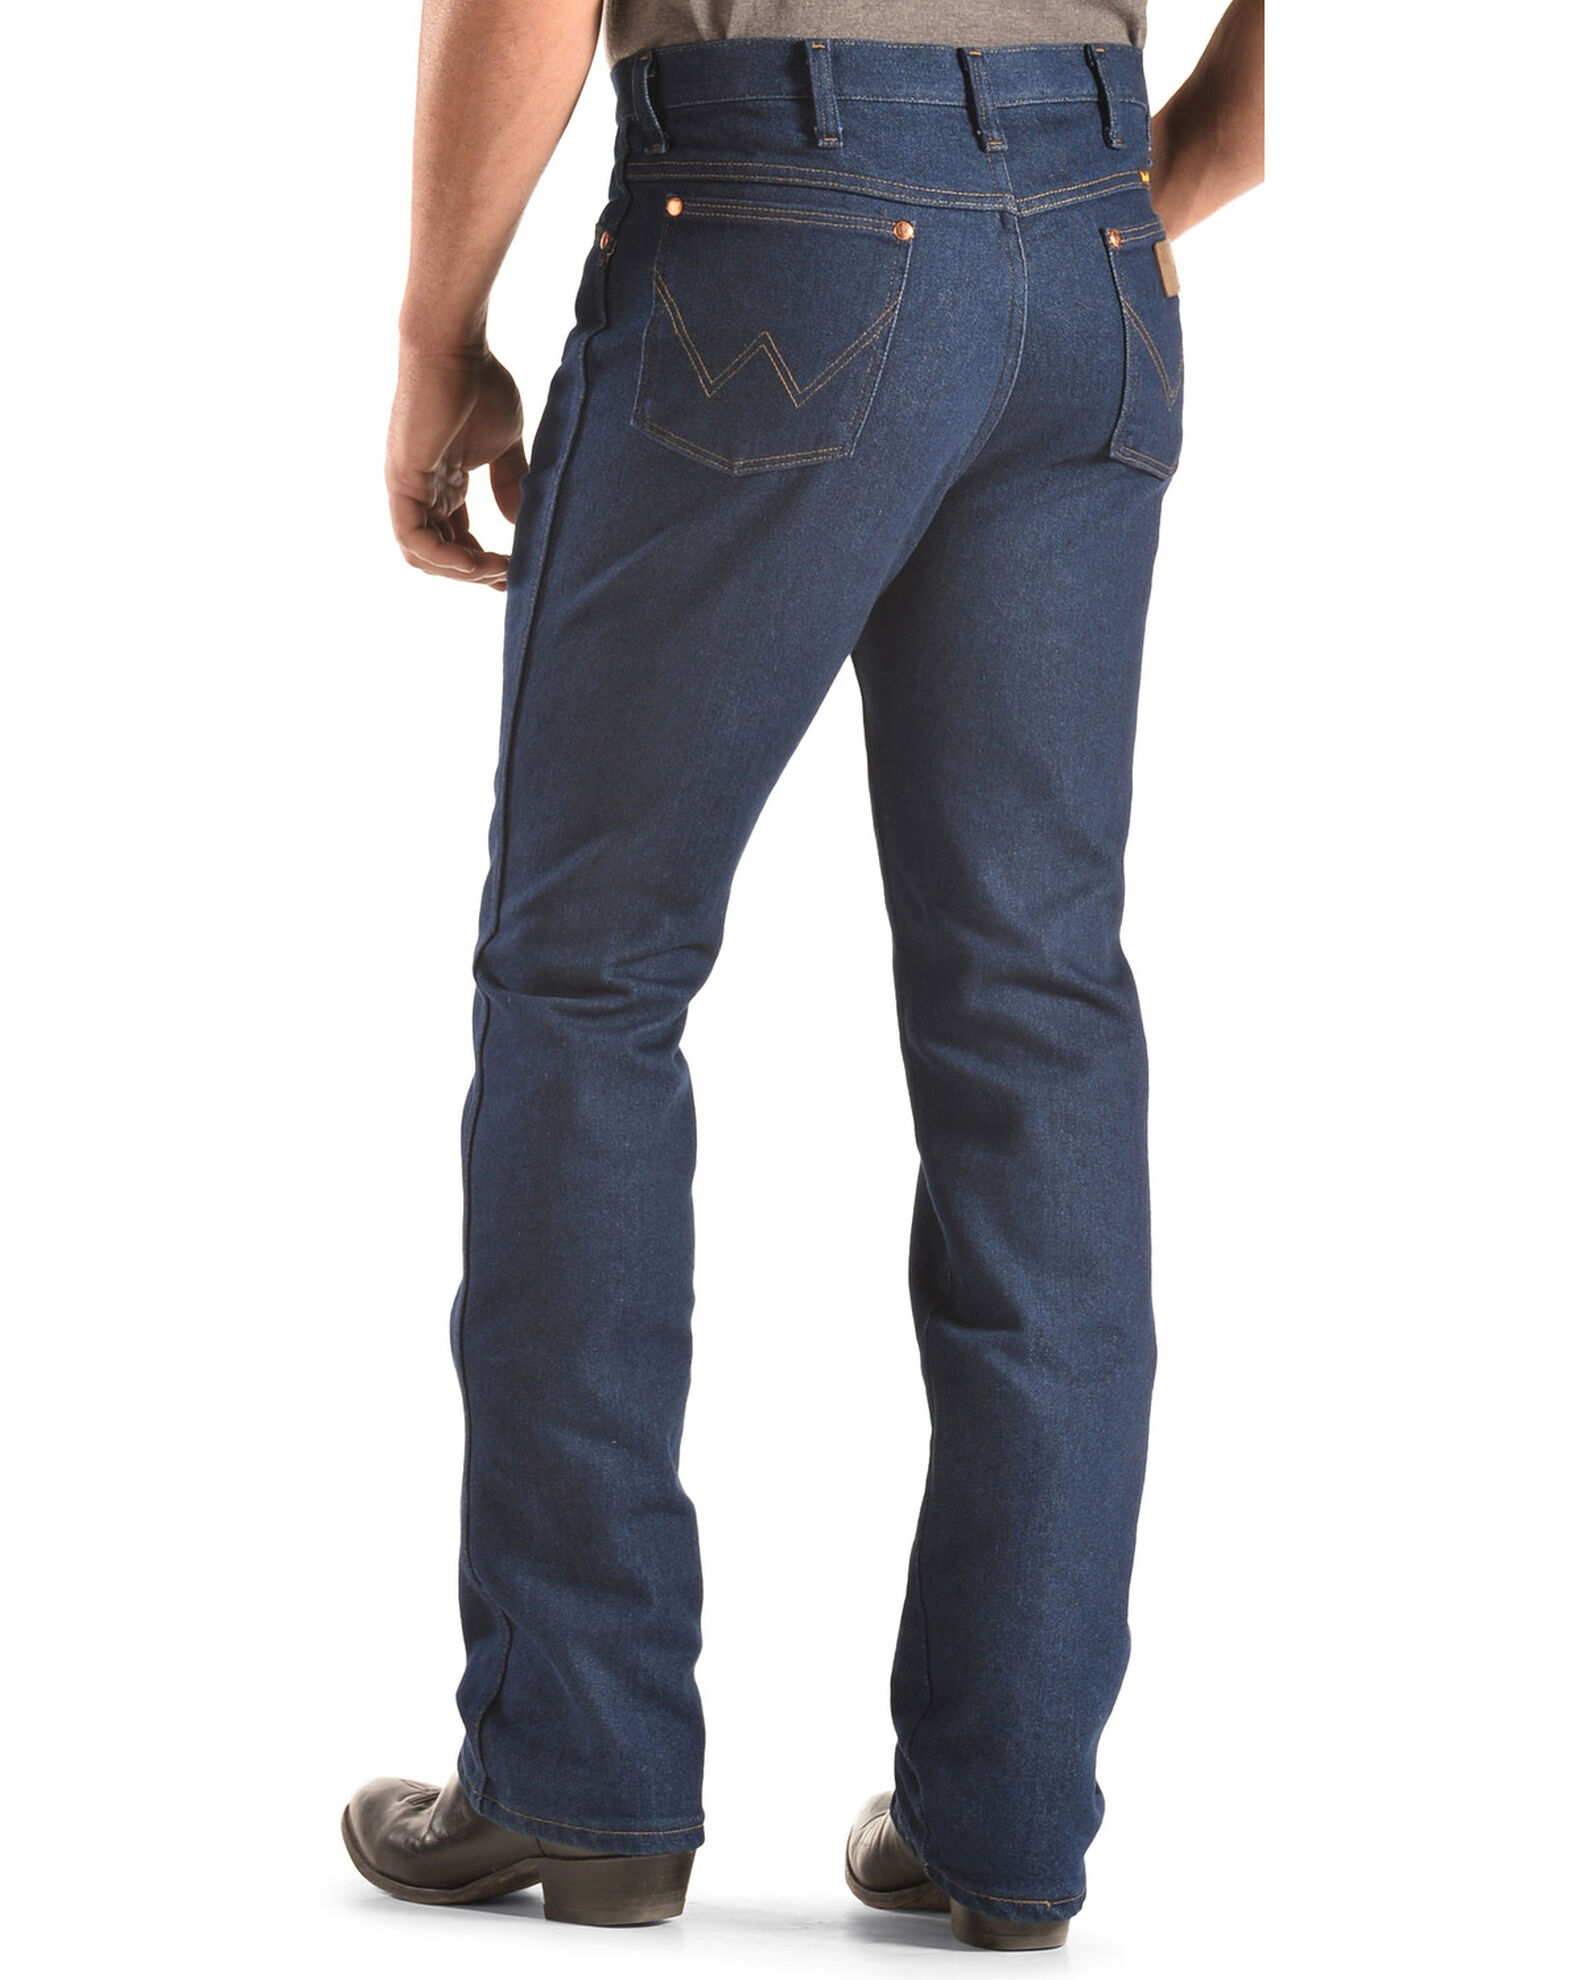 Wrangler 938 Cowboy Cut Slim Straight - Outfitter